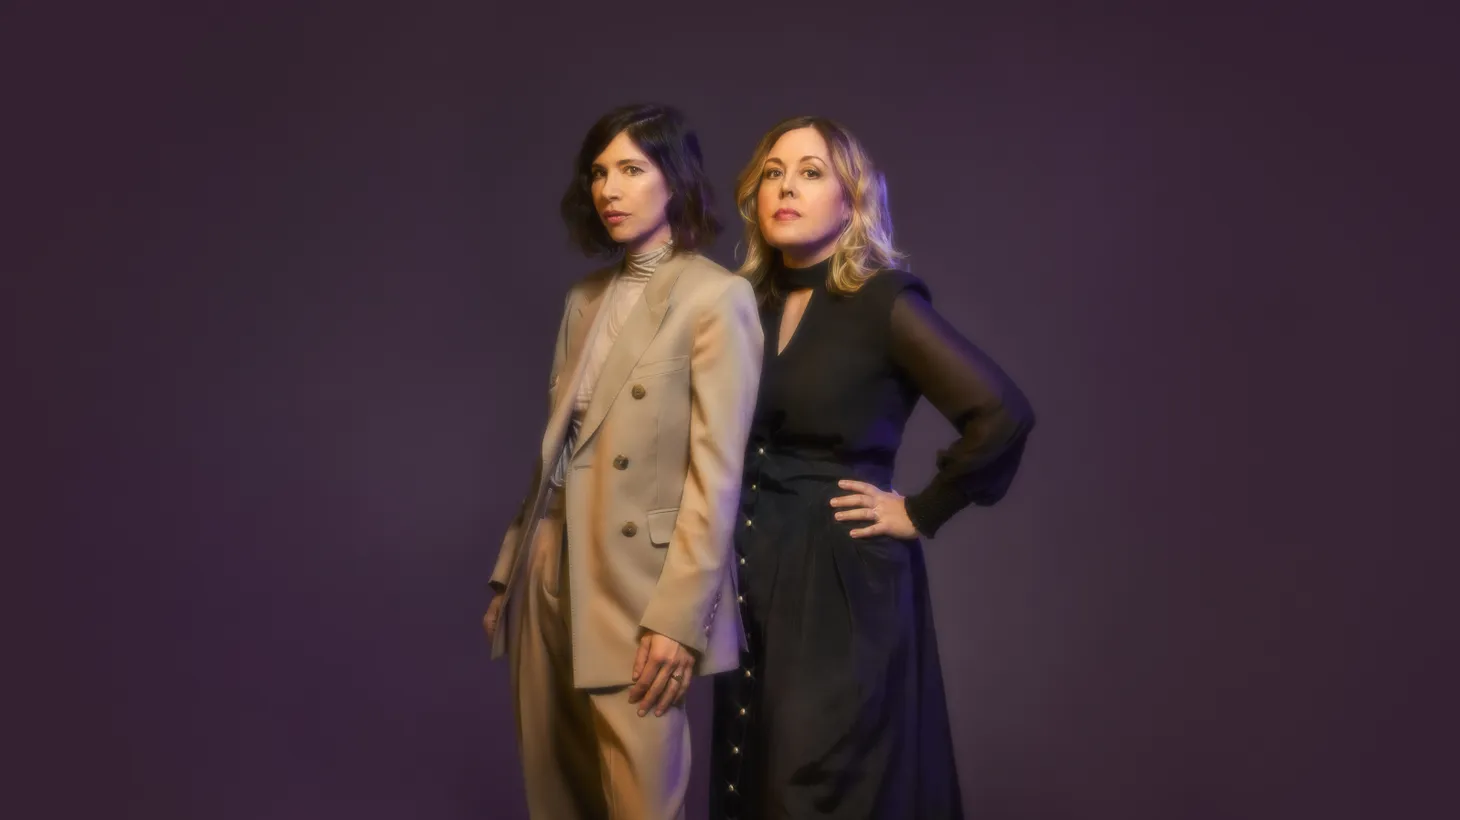 (L to R) Carrie Brownstein and Corin Tucker (Sleater Kinney), lowkey raising hell since the nineteen-nineties.